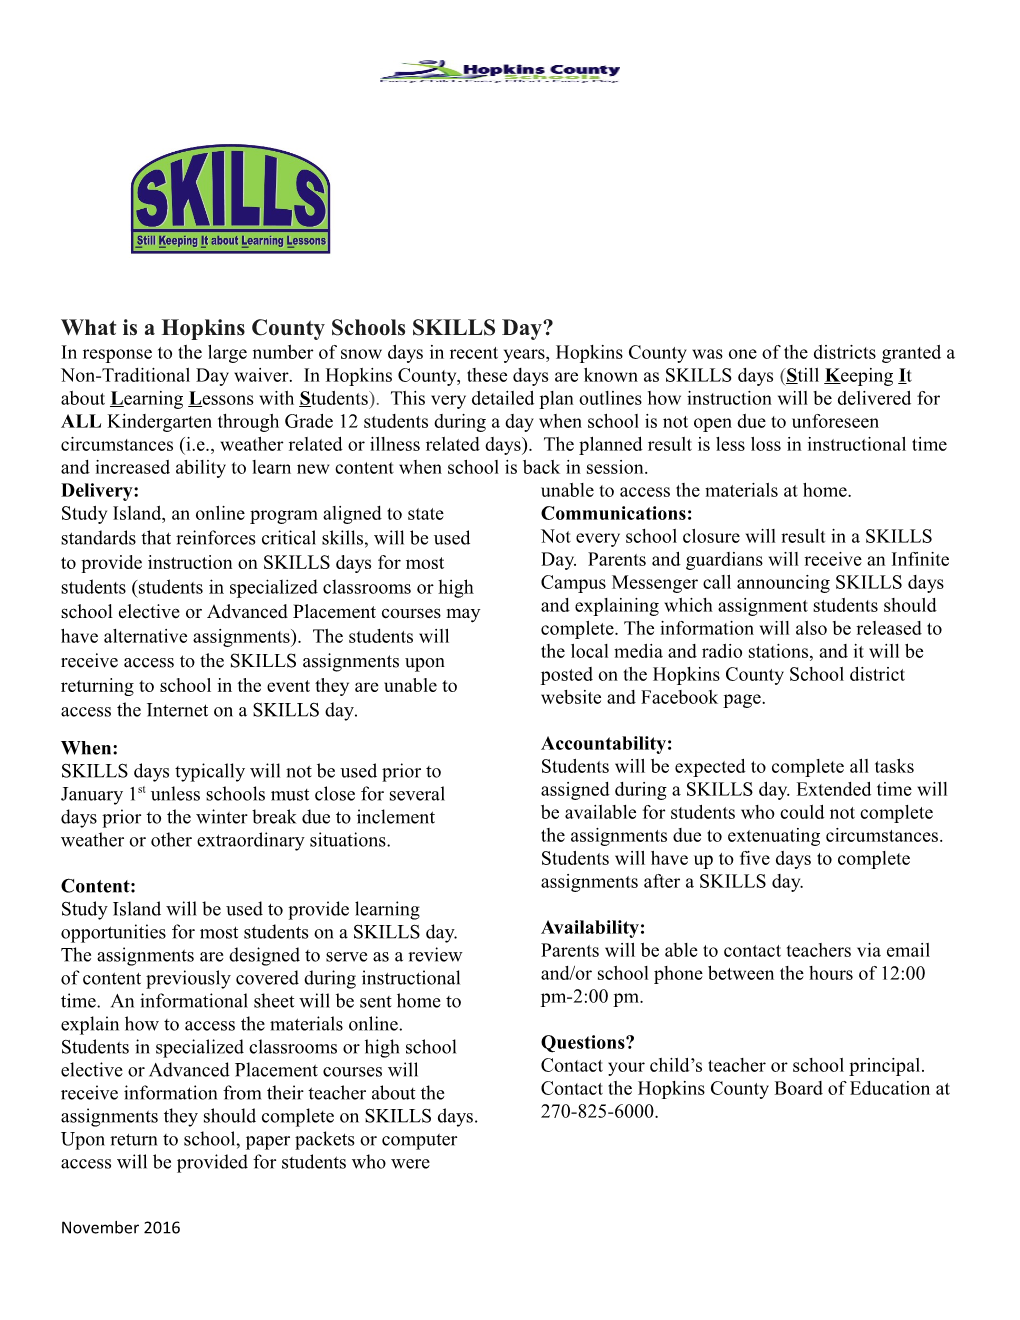 What Is a Hopkins County Schools SKILLS Day?